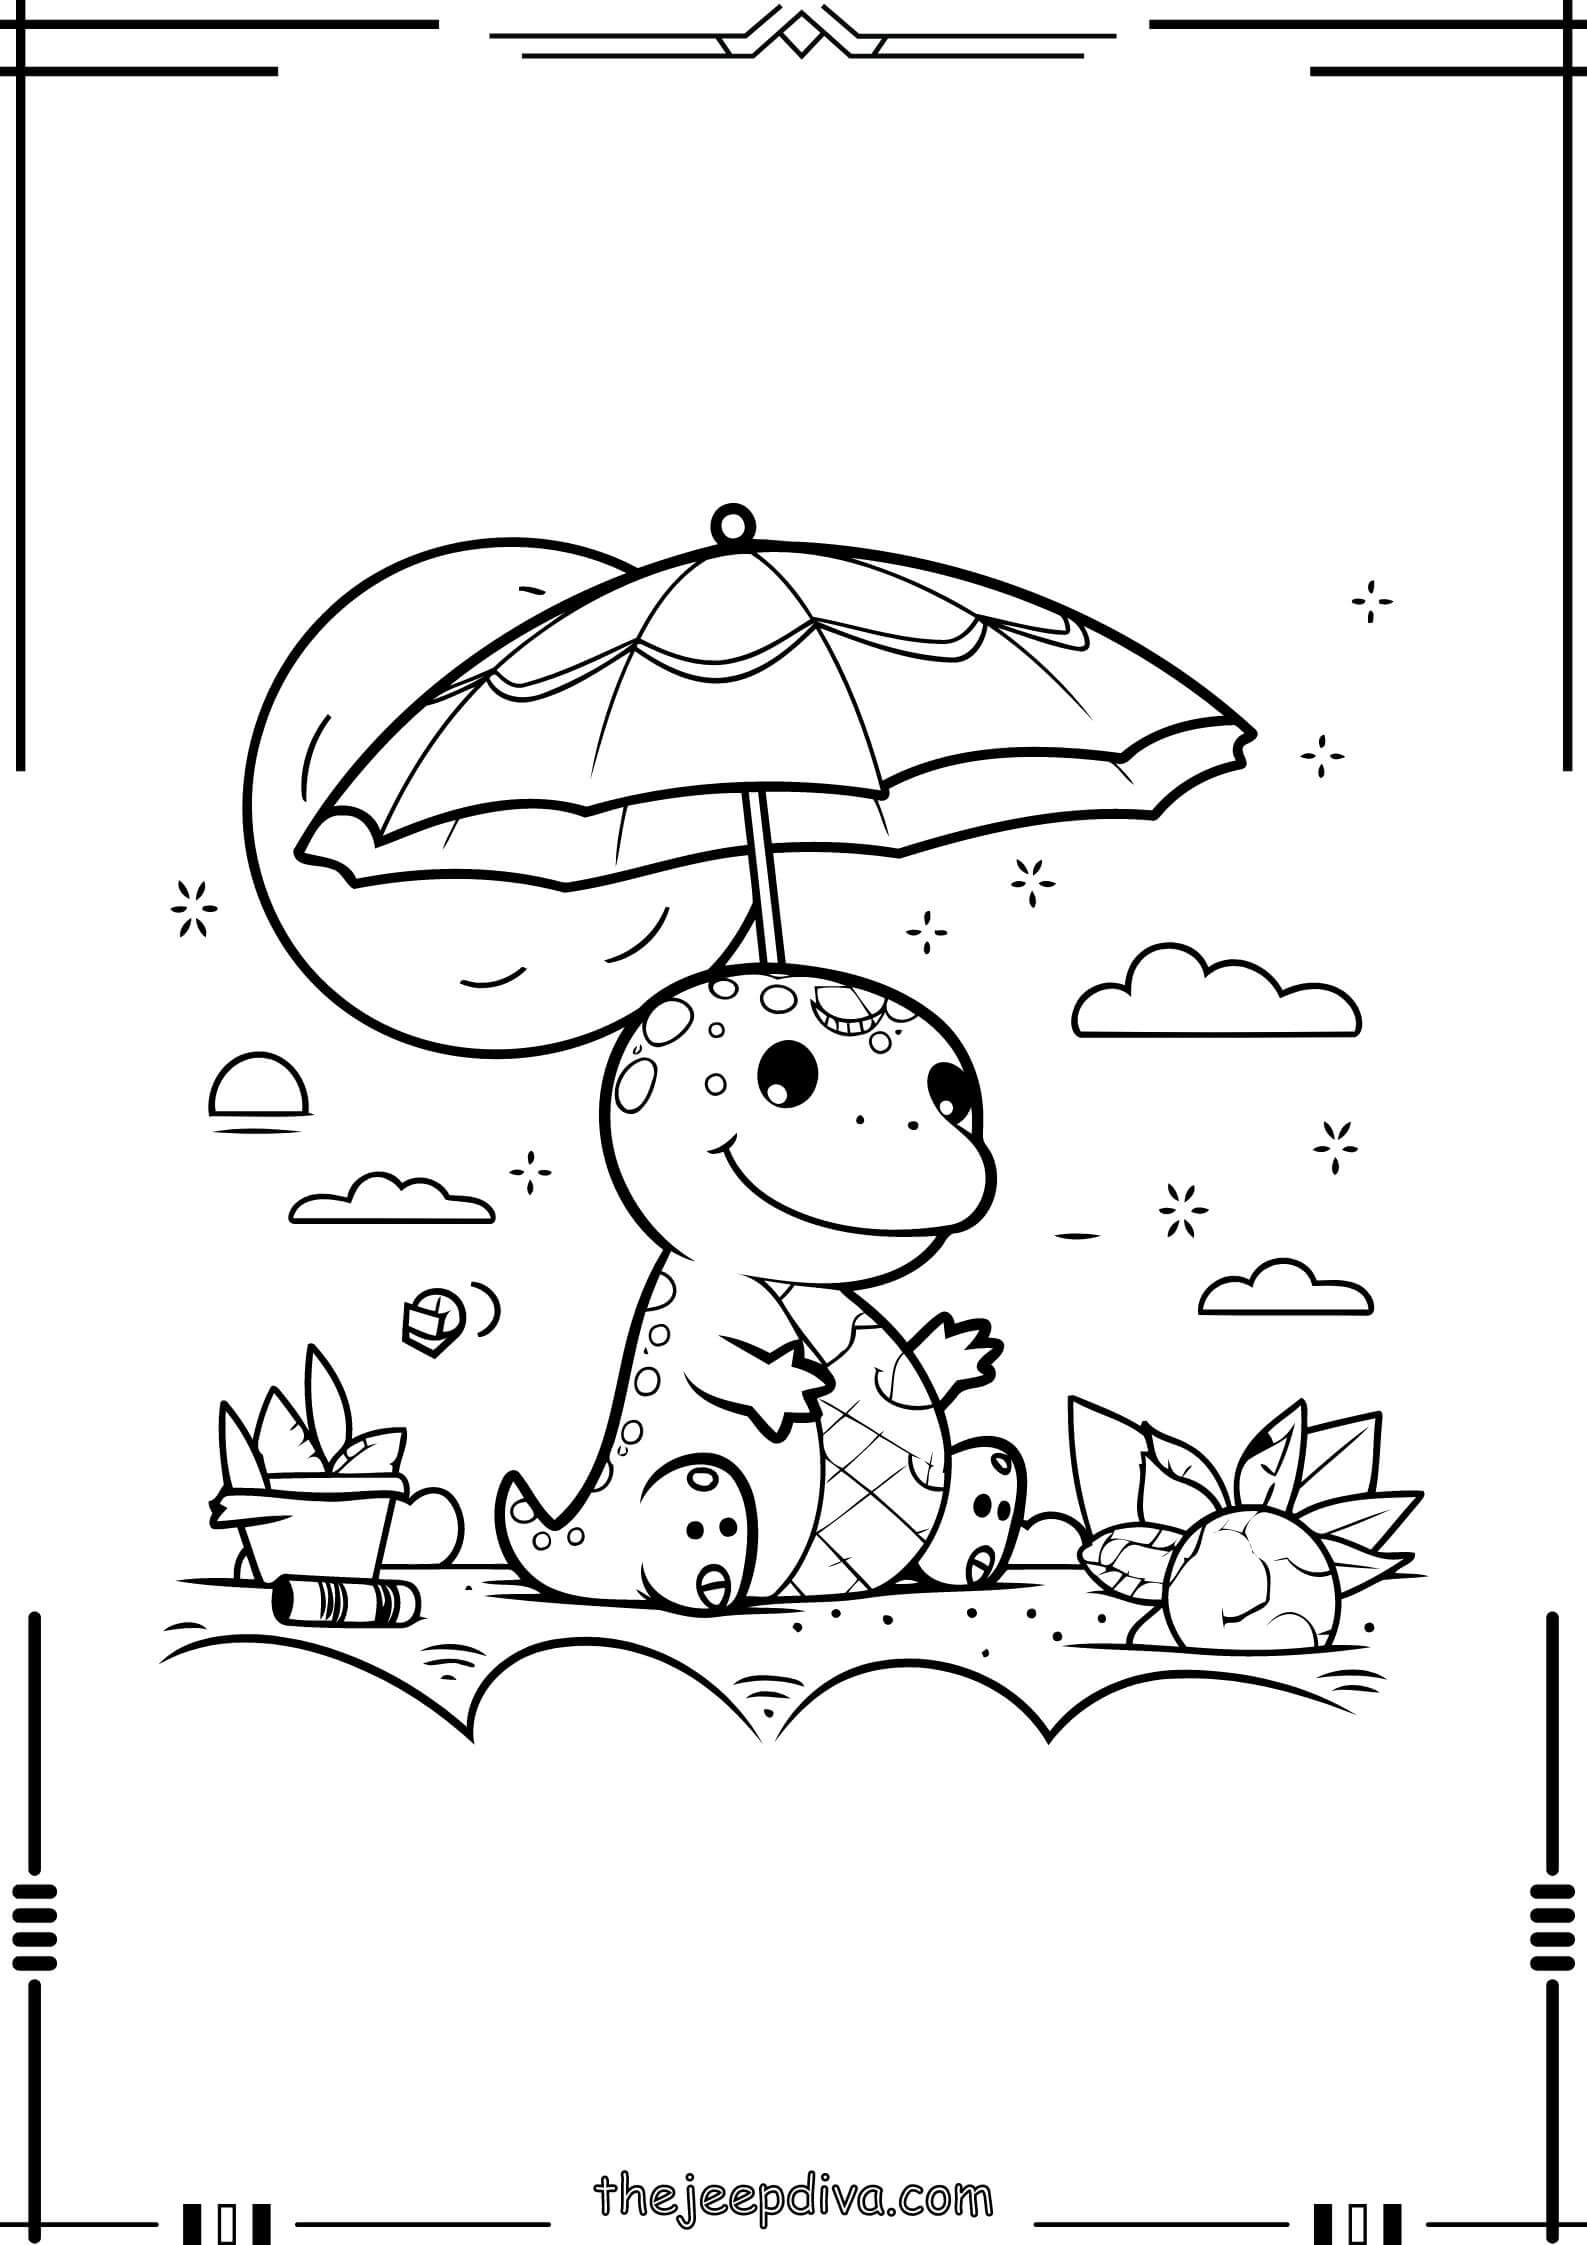 Dinosaur-Colouring-Pages-Easy-21